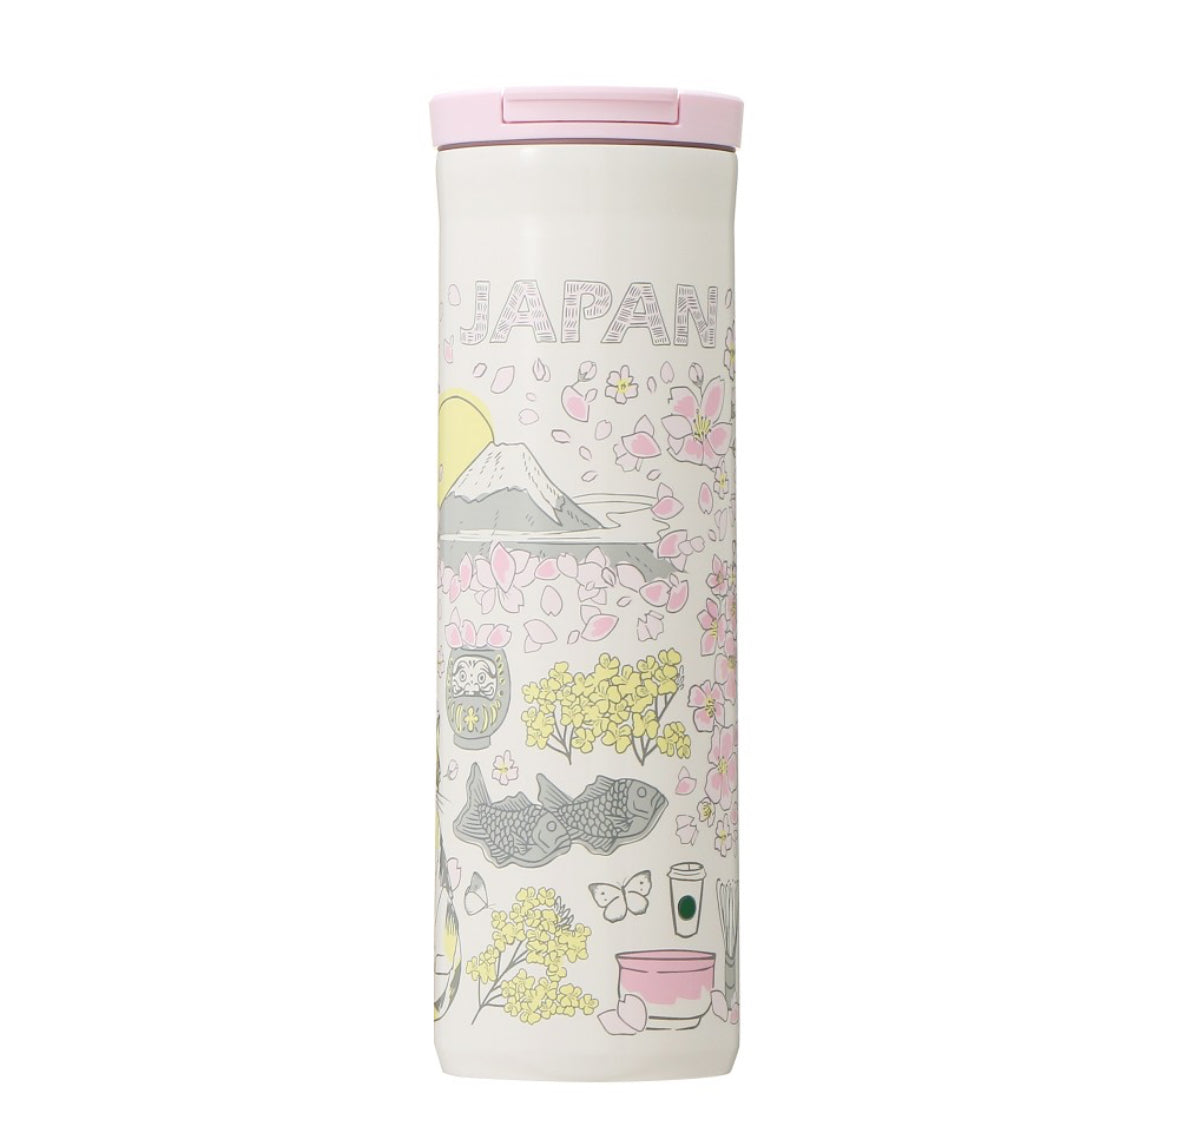 「Been There Series」Spring Japan stainless tumbler 473ml